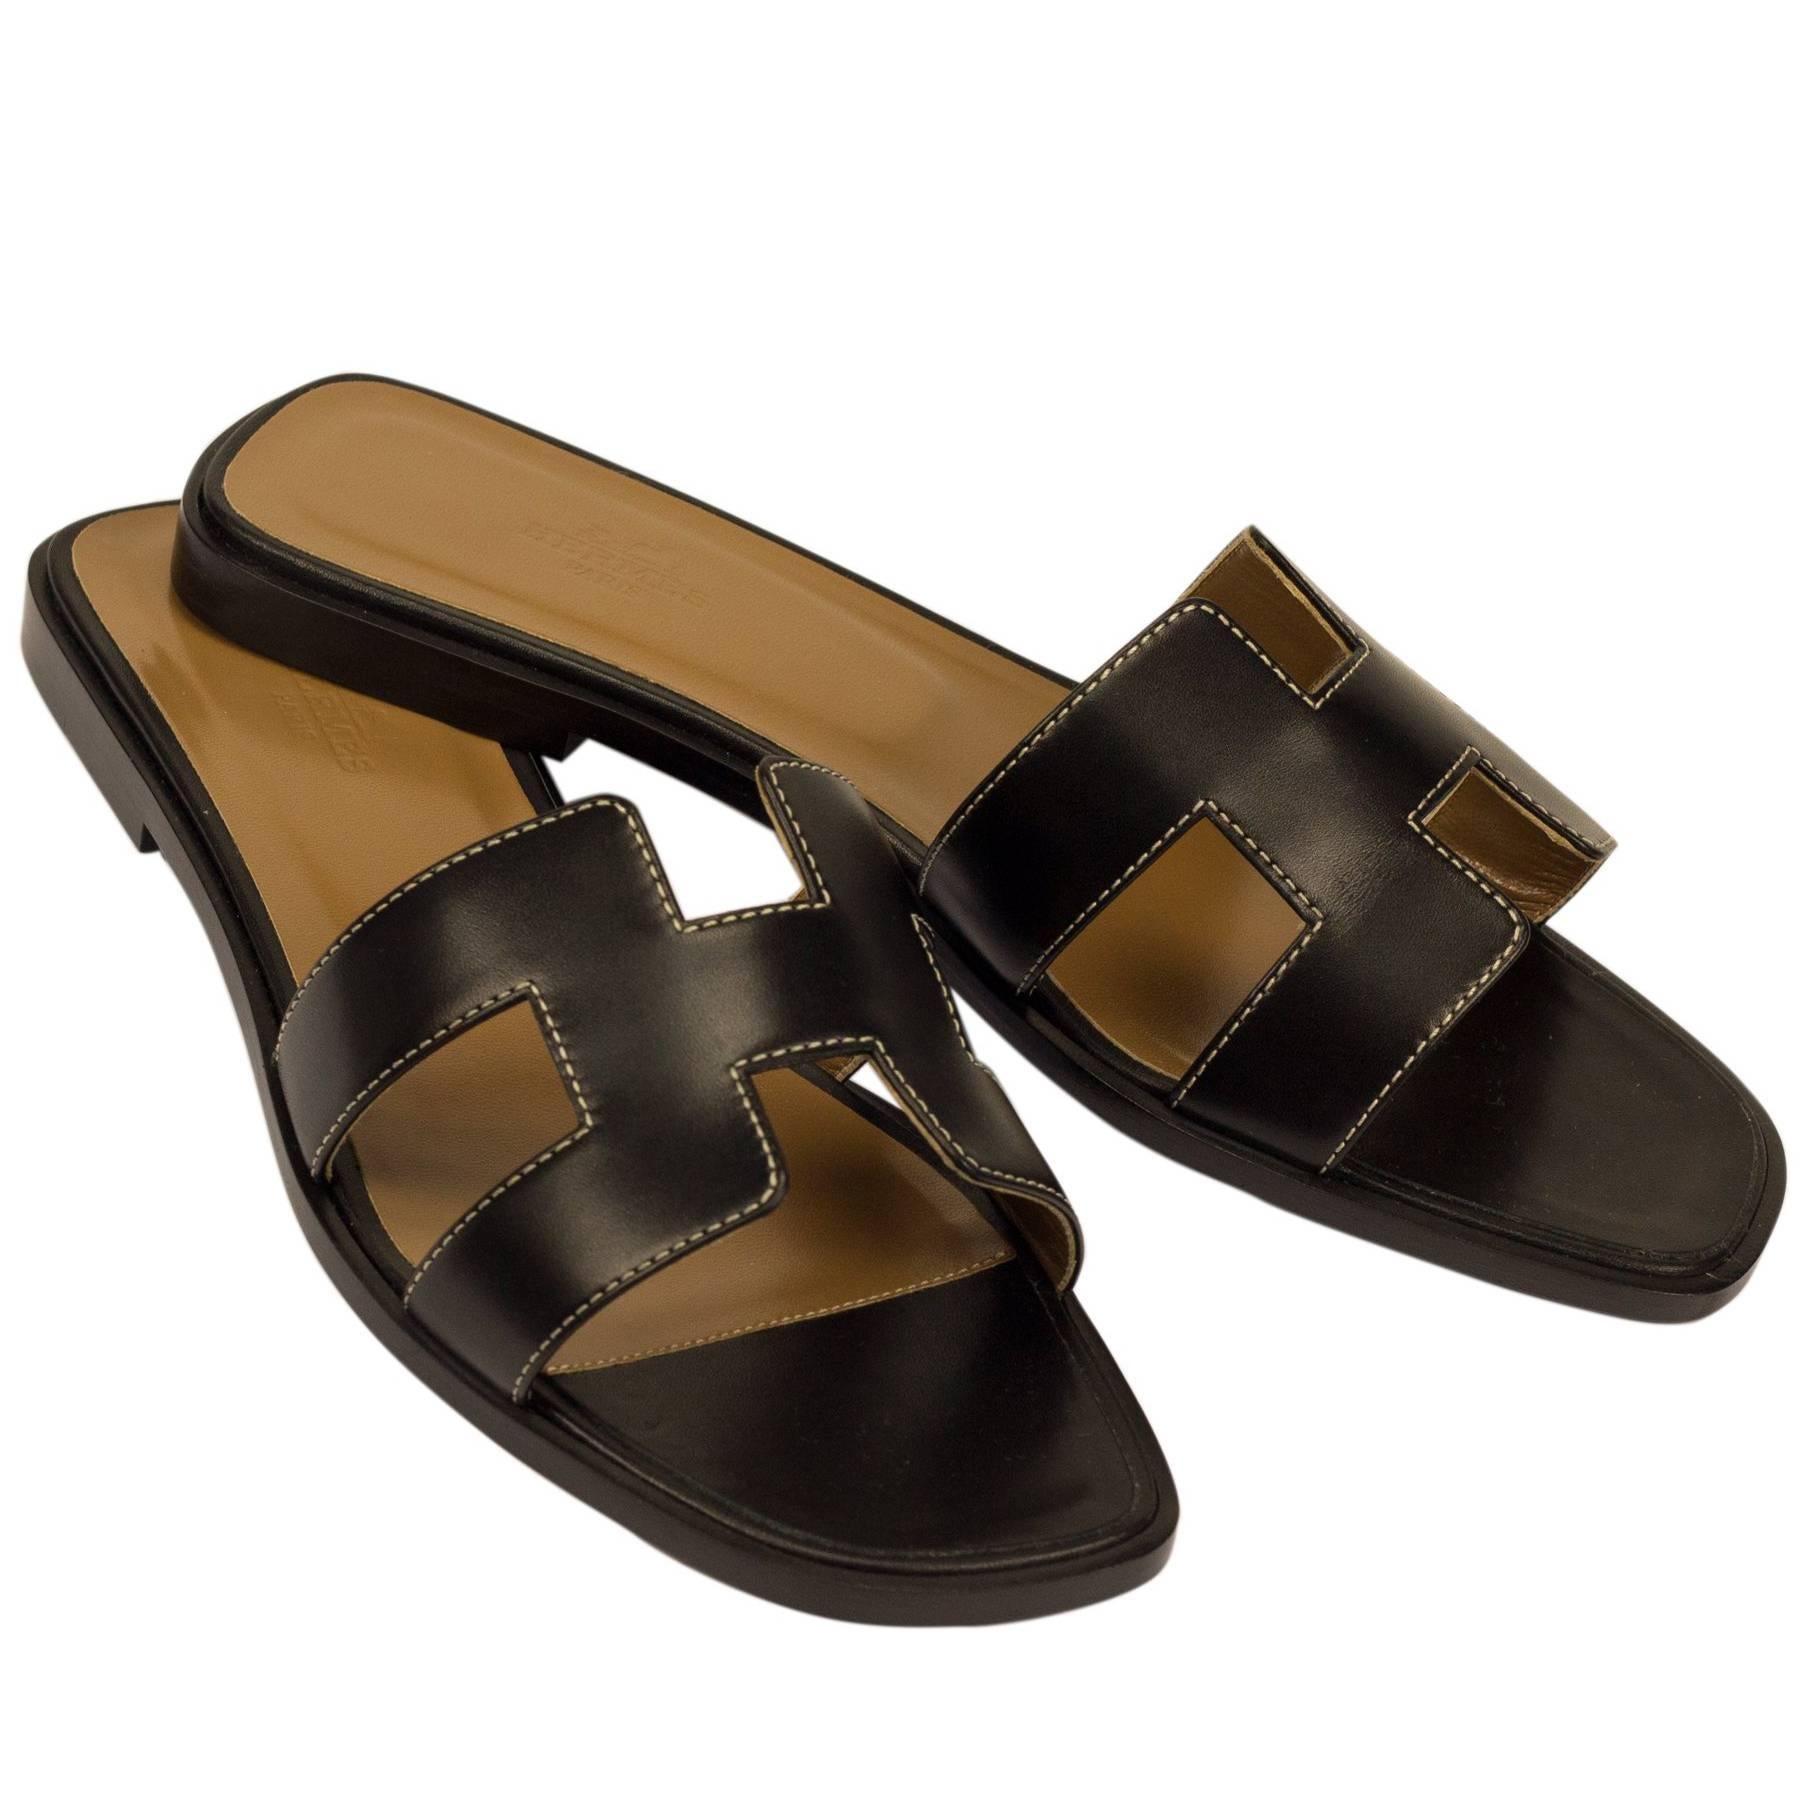 Hermes Woman Sandals "Oran" Box Leather Black with Ecru Stitching Color 8 Size